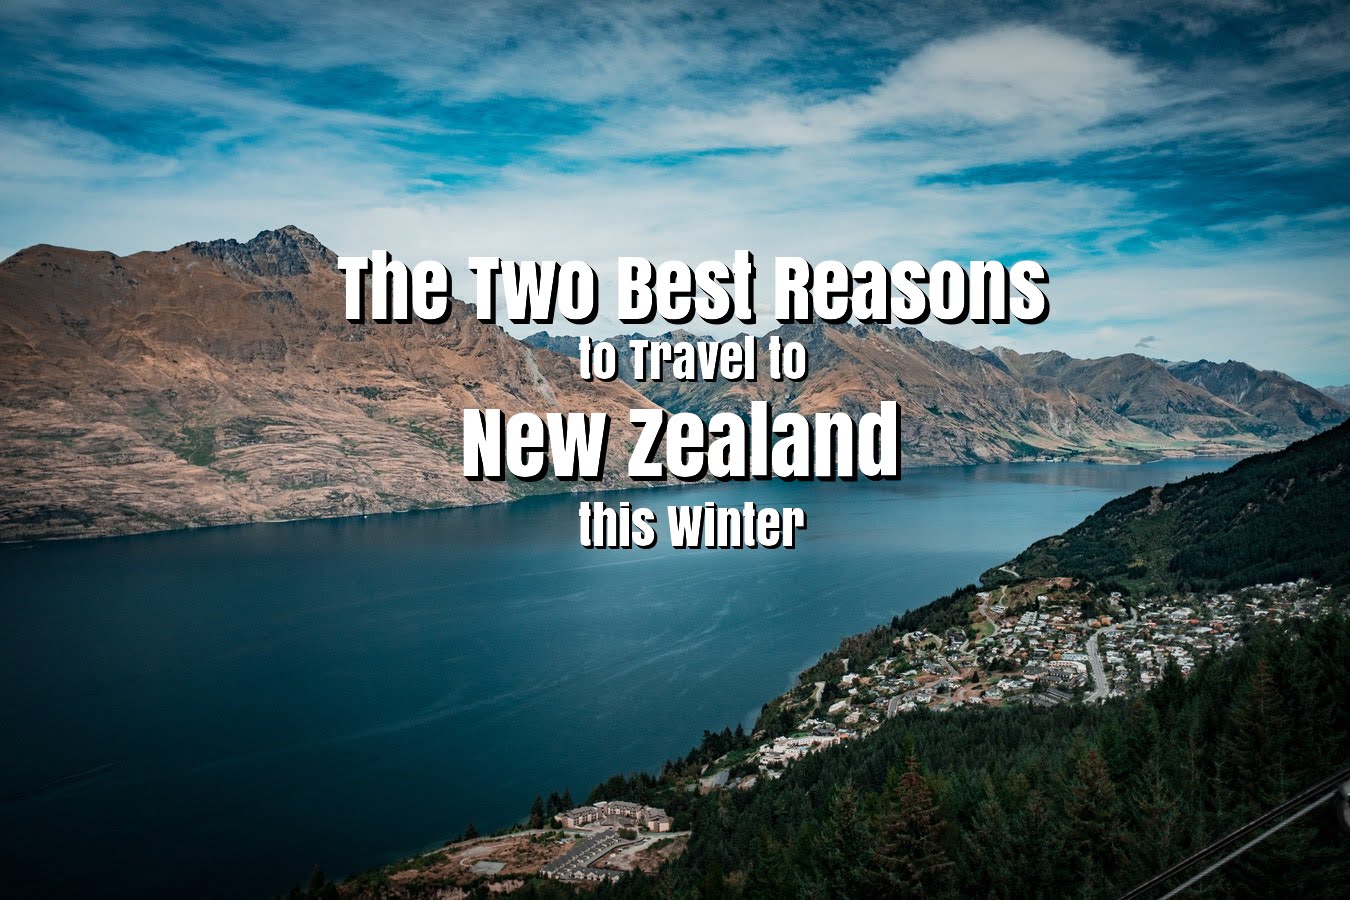 The Two Best Reasons to Travel to New Zealand This Winter